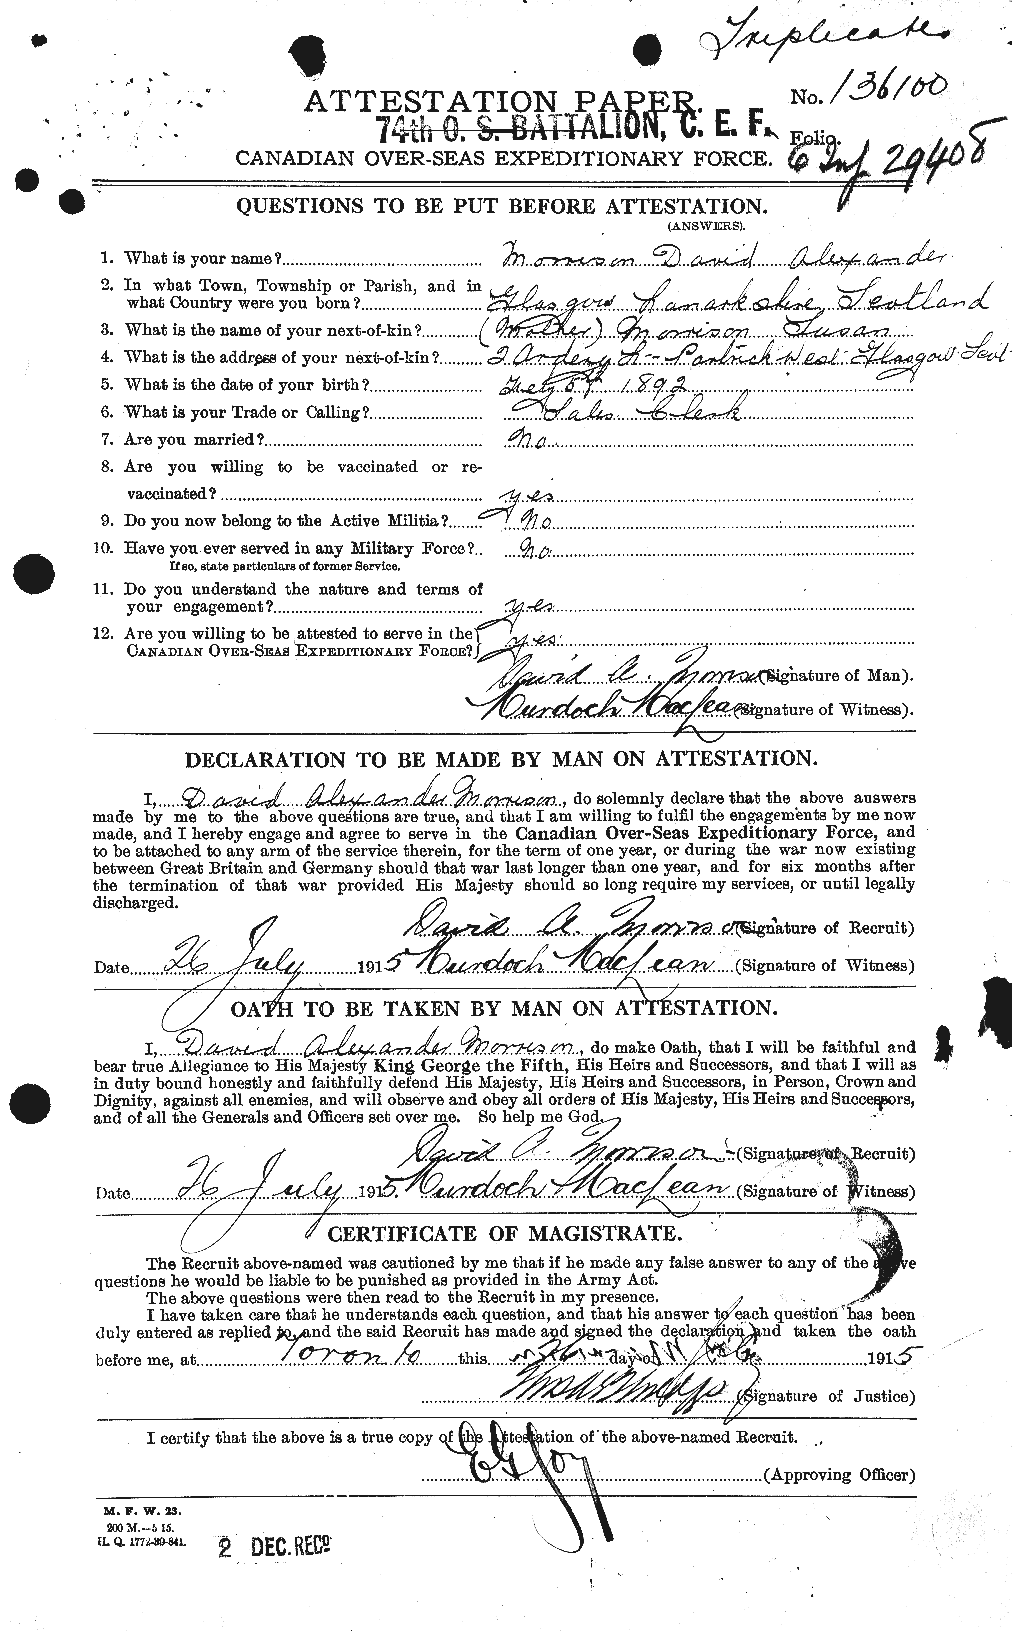 Personnel Records of the First World War - CEF 505425a